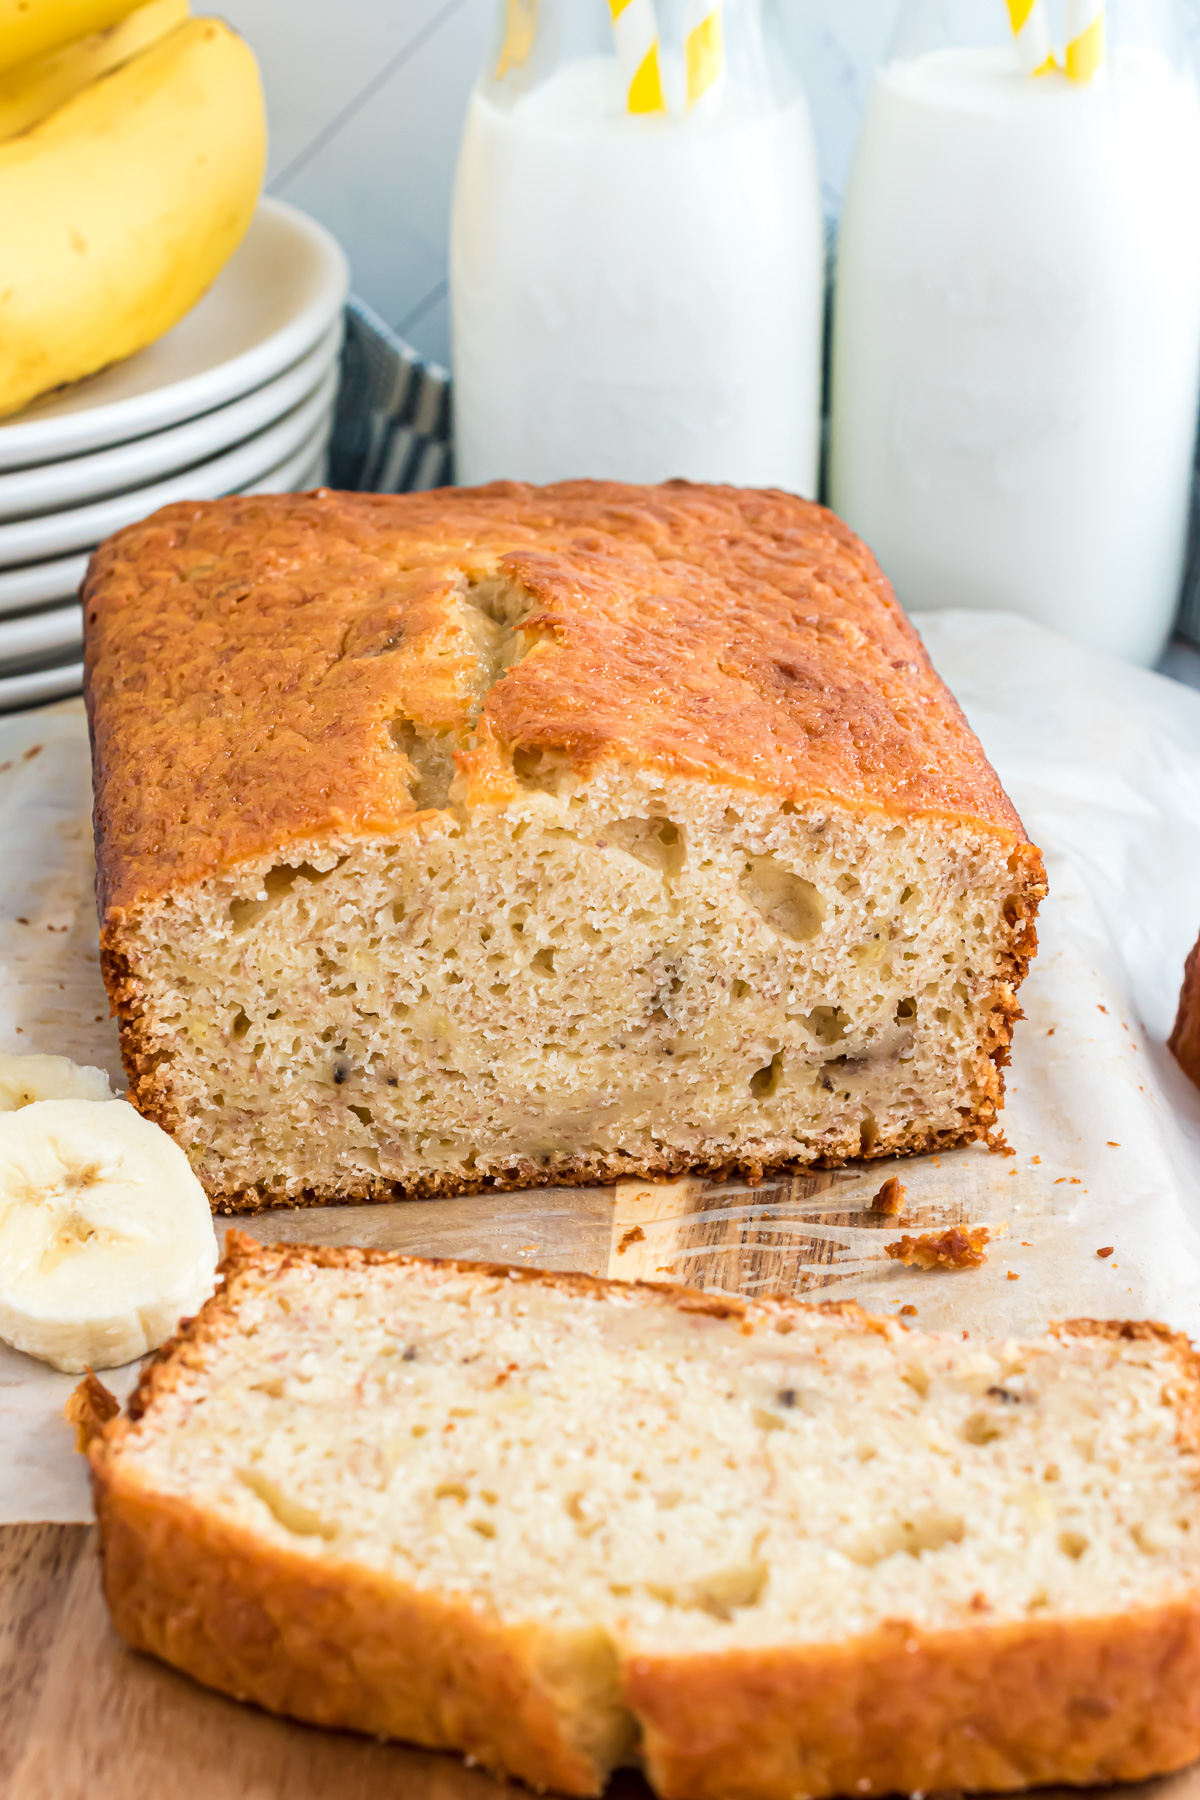 A loaf of banana bread with the end slice cut off to reveal the inside texture of the loaf.